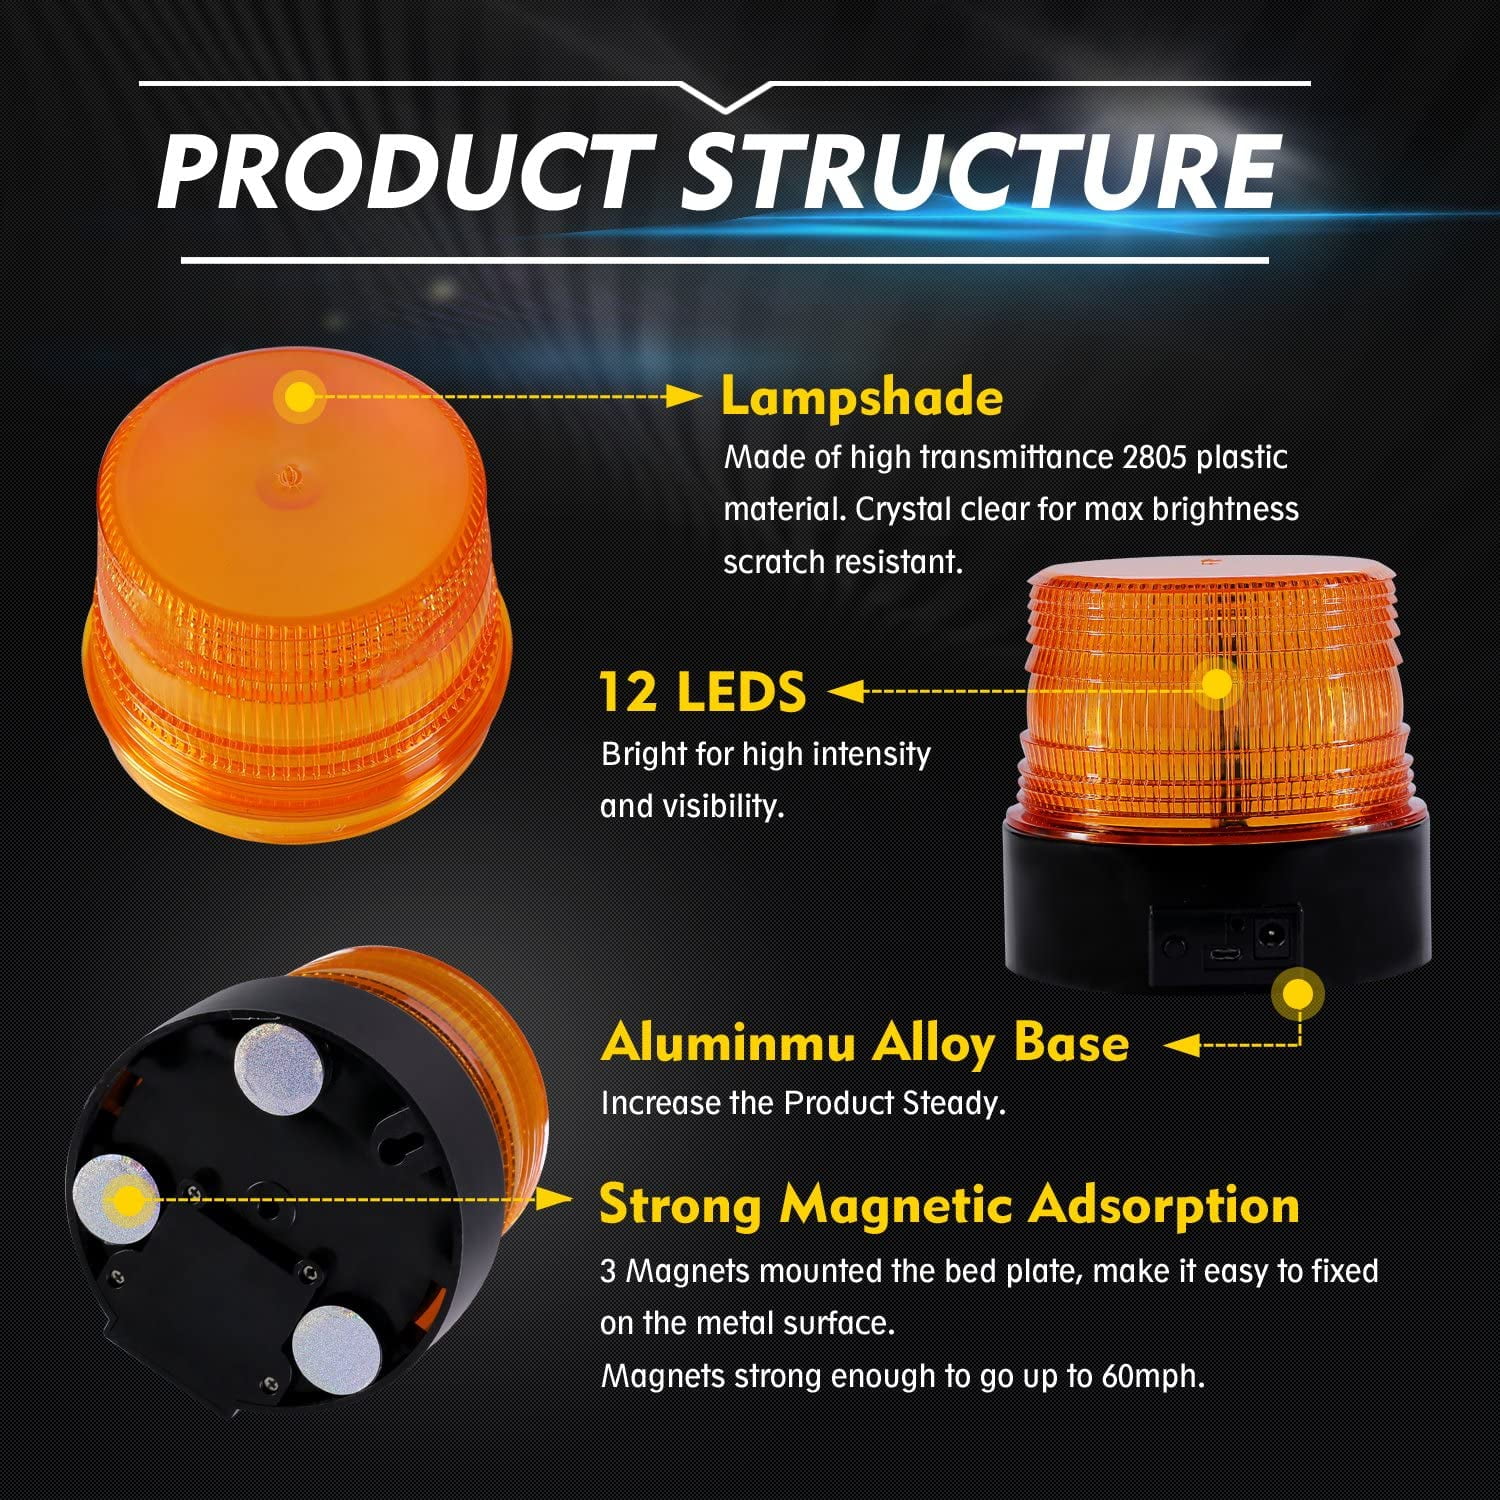 Big Ant Amber 48 LED Warning Lights Safety Flashing Strobe Lights with Magnetic for Most Vehicle Trucks Cars LED Strobe Light Law Enforcement Emergency Hazard Beacon Caution Warning Snow Plow 